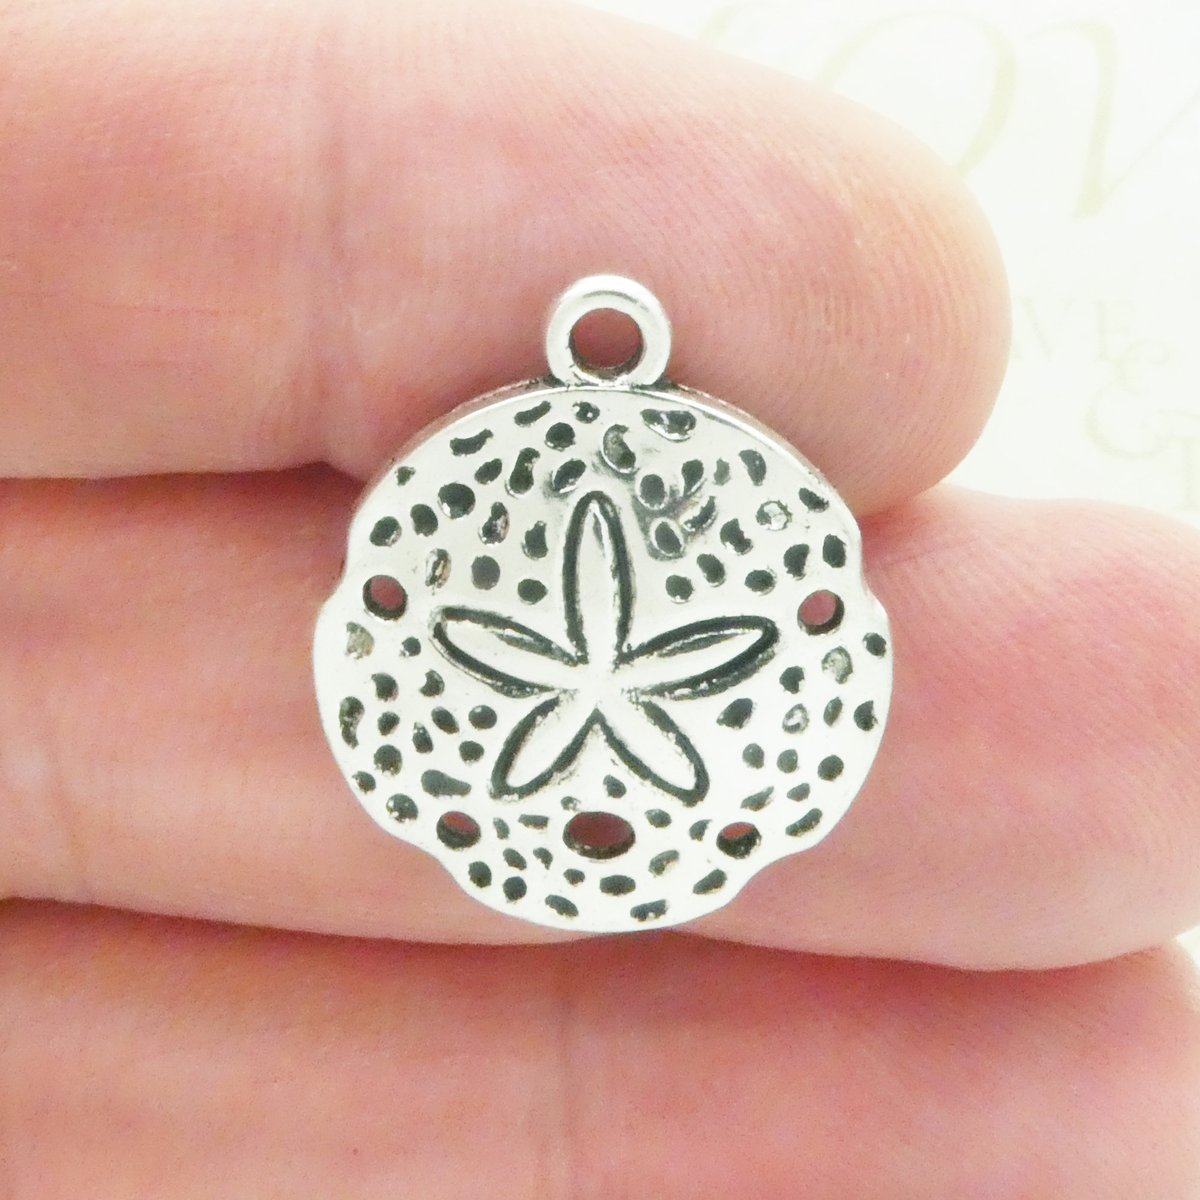 Excited to share the latest addition to my #etsy shop: 20 Silver Sand Dollar Charms Bulk by TIJC SP2045B etsy.me/3dcbYC1 #silver #sanddollarearrings #sanddollarpendant #sanddollarcharm #sanddollarjewelry #sanddollarnecklace #seashellbracelet #seashellnecklace